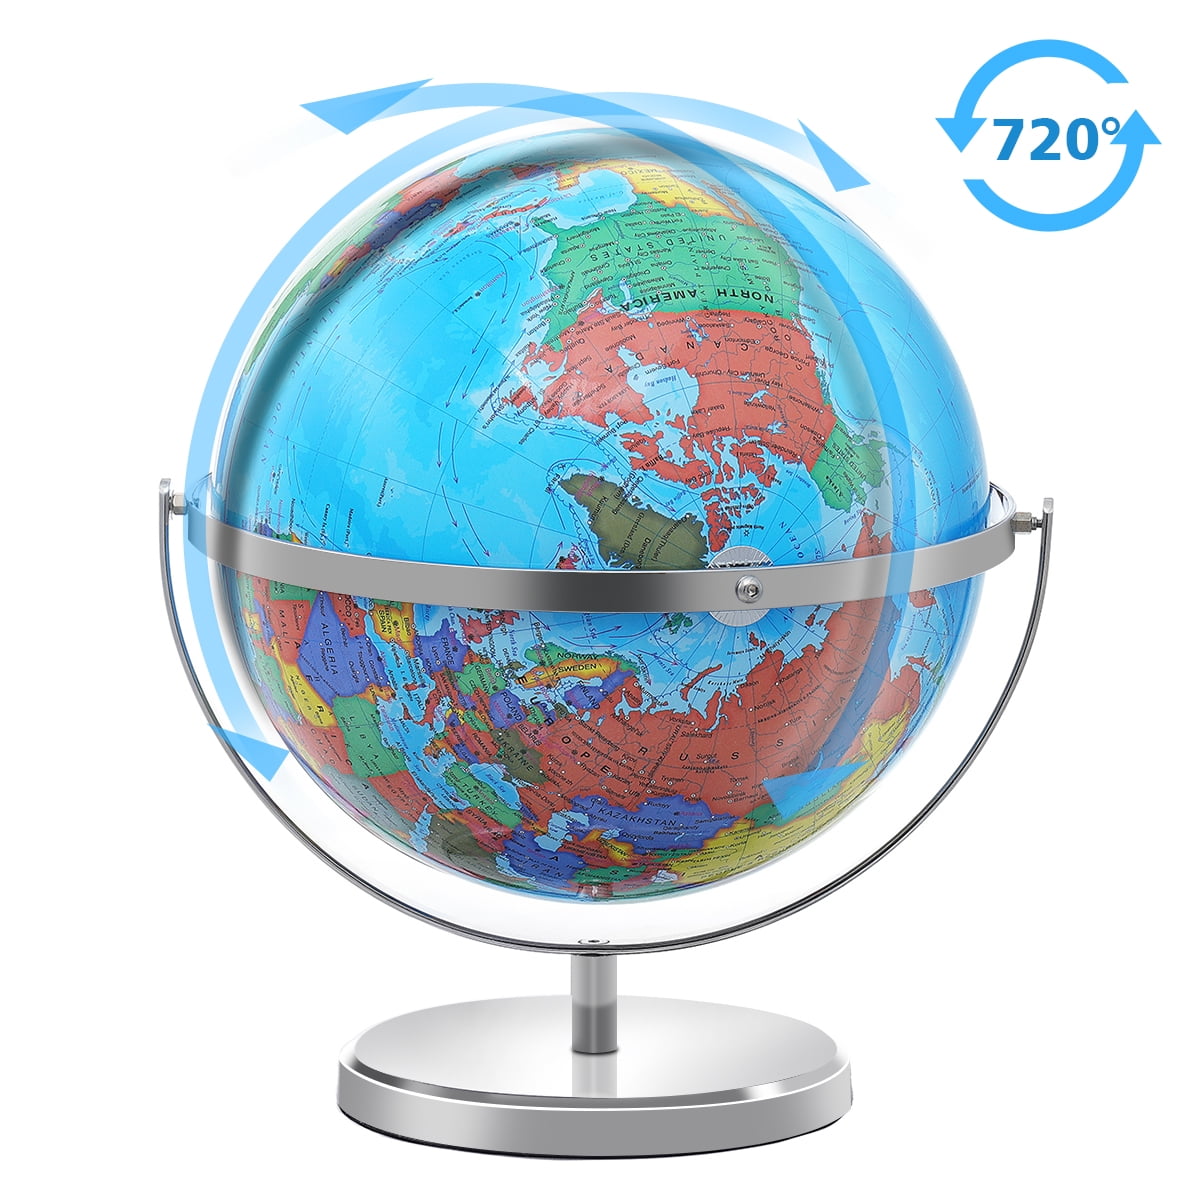 Teaching Aid Blow Up Atlas World Map of the Earth 2x Inflatable Globe 40cm 